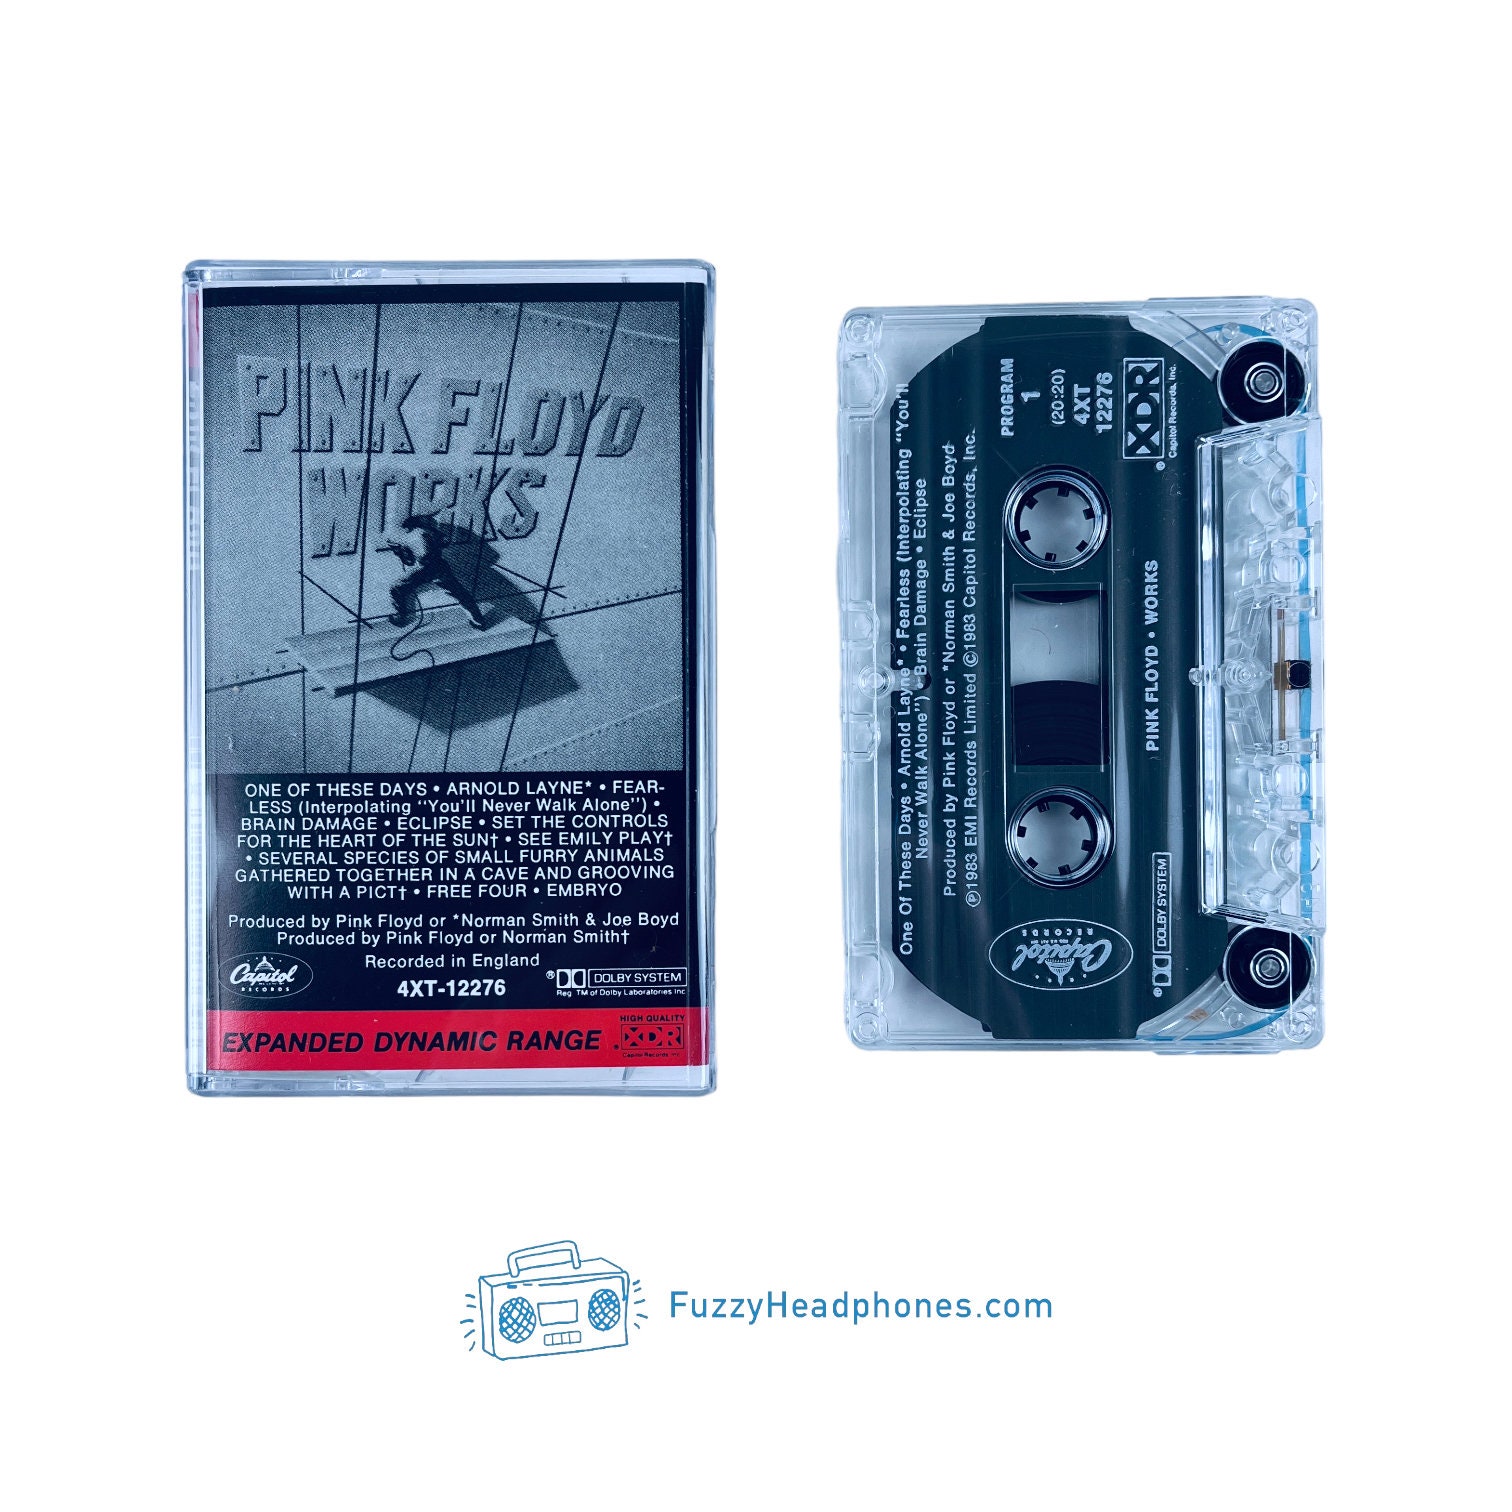 Pink Floyd Works Cassette Tape 1983 Brain Damage, One of These Days,  Eclipse, Embryo, 70s Rock Tested & Guaranteed 